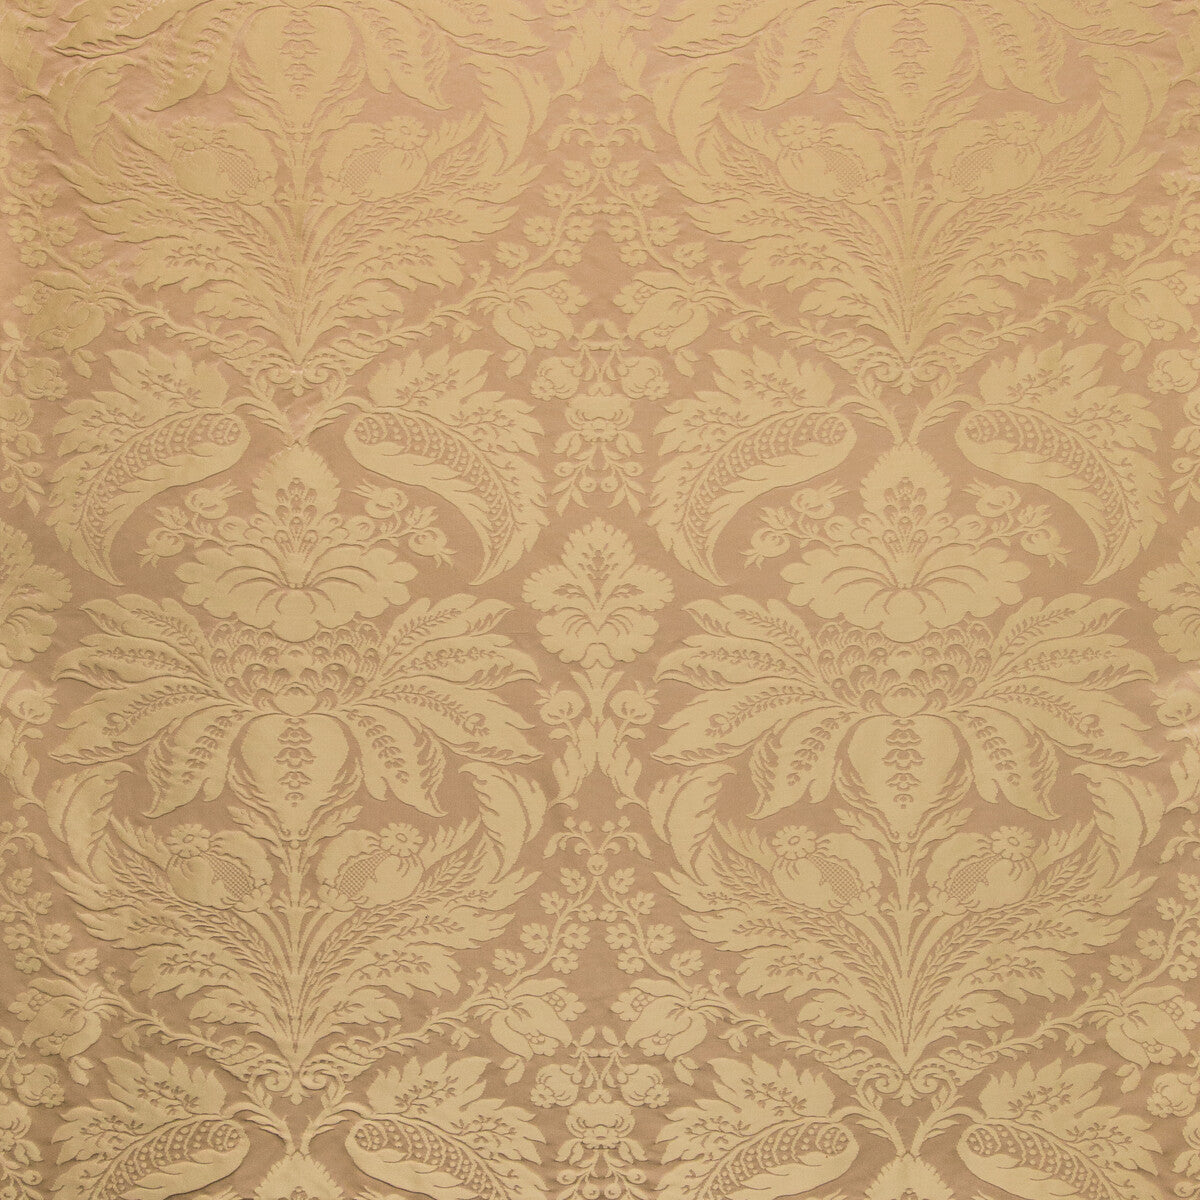 Damask Pierre fabric in wheat color - pattern 8013188.616.0 - by Brunschwig &amp; Fils in the B&amp;F Showroom Exclusive 2019 collection